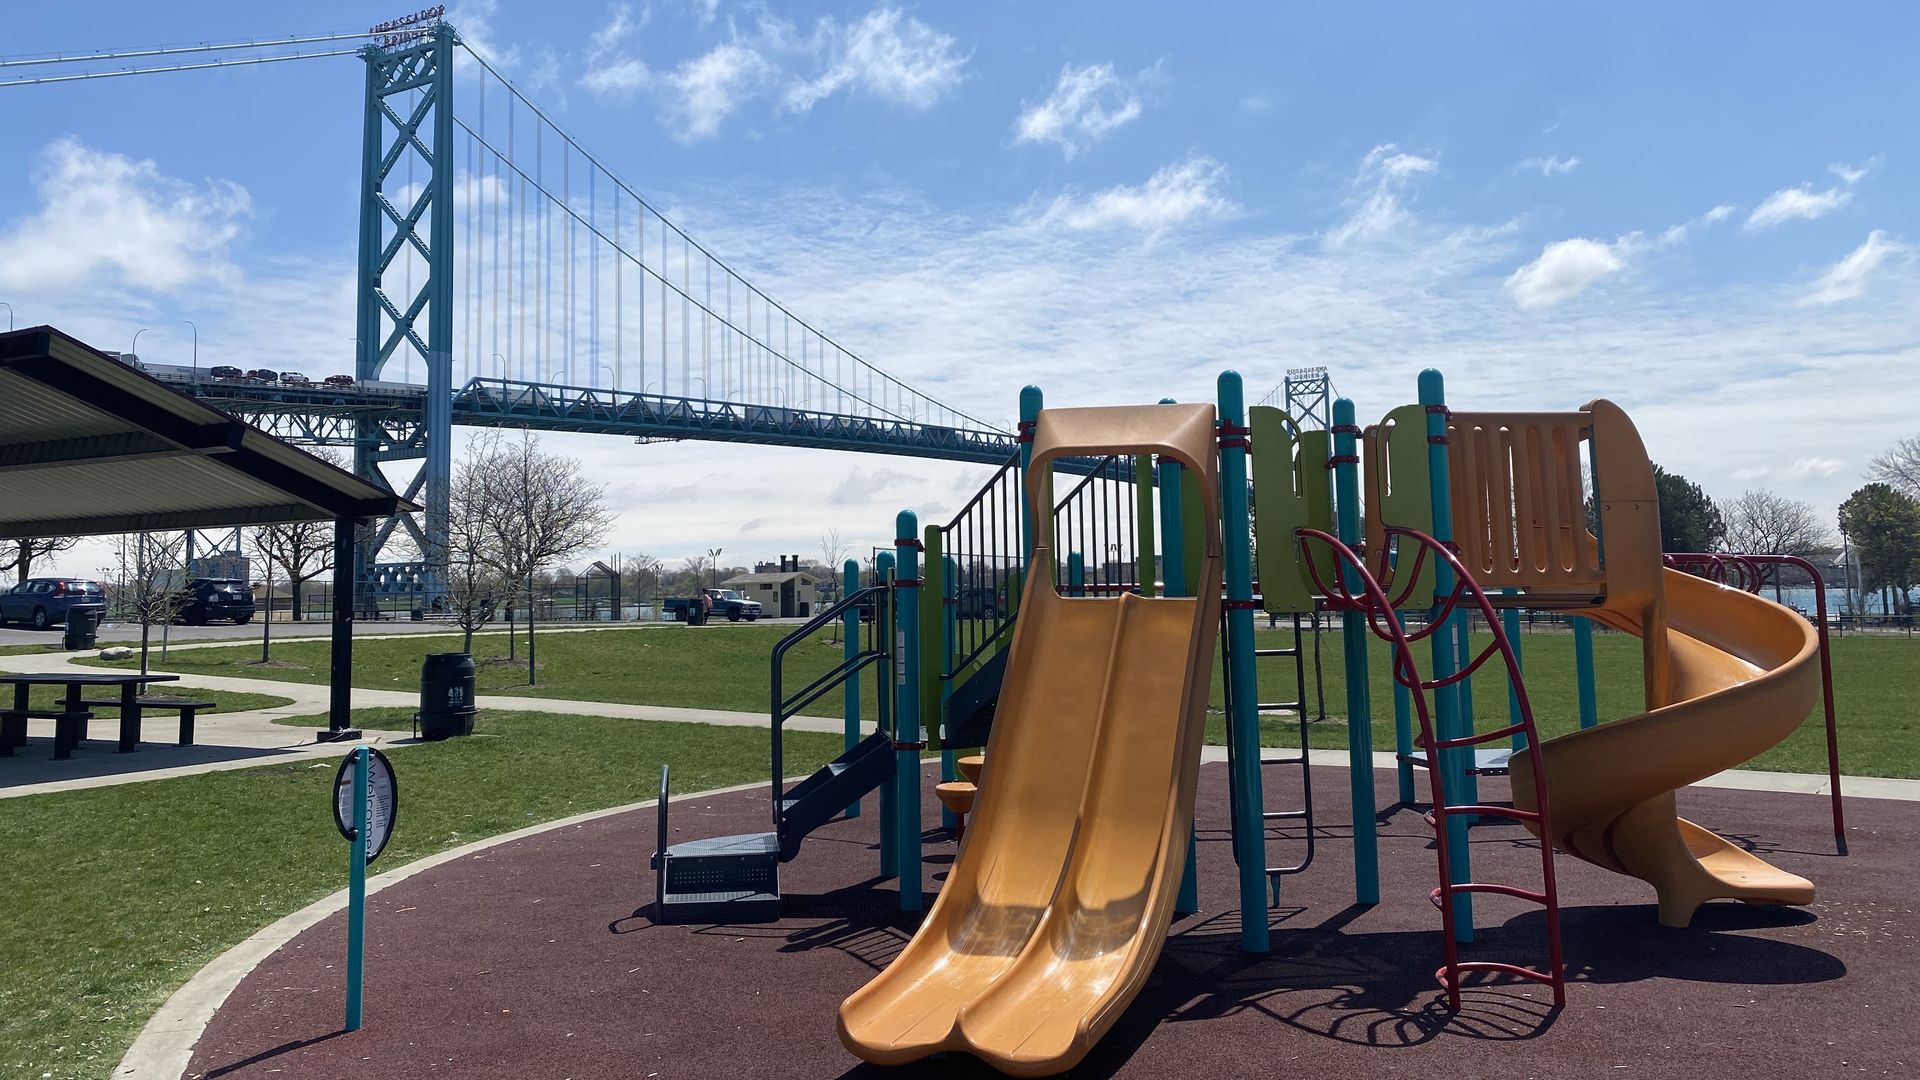 A playset is shown at Riverside Park, with the Ambassador Bridge in the background.